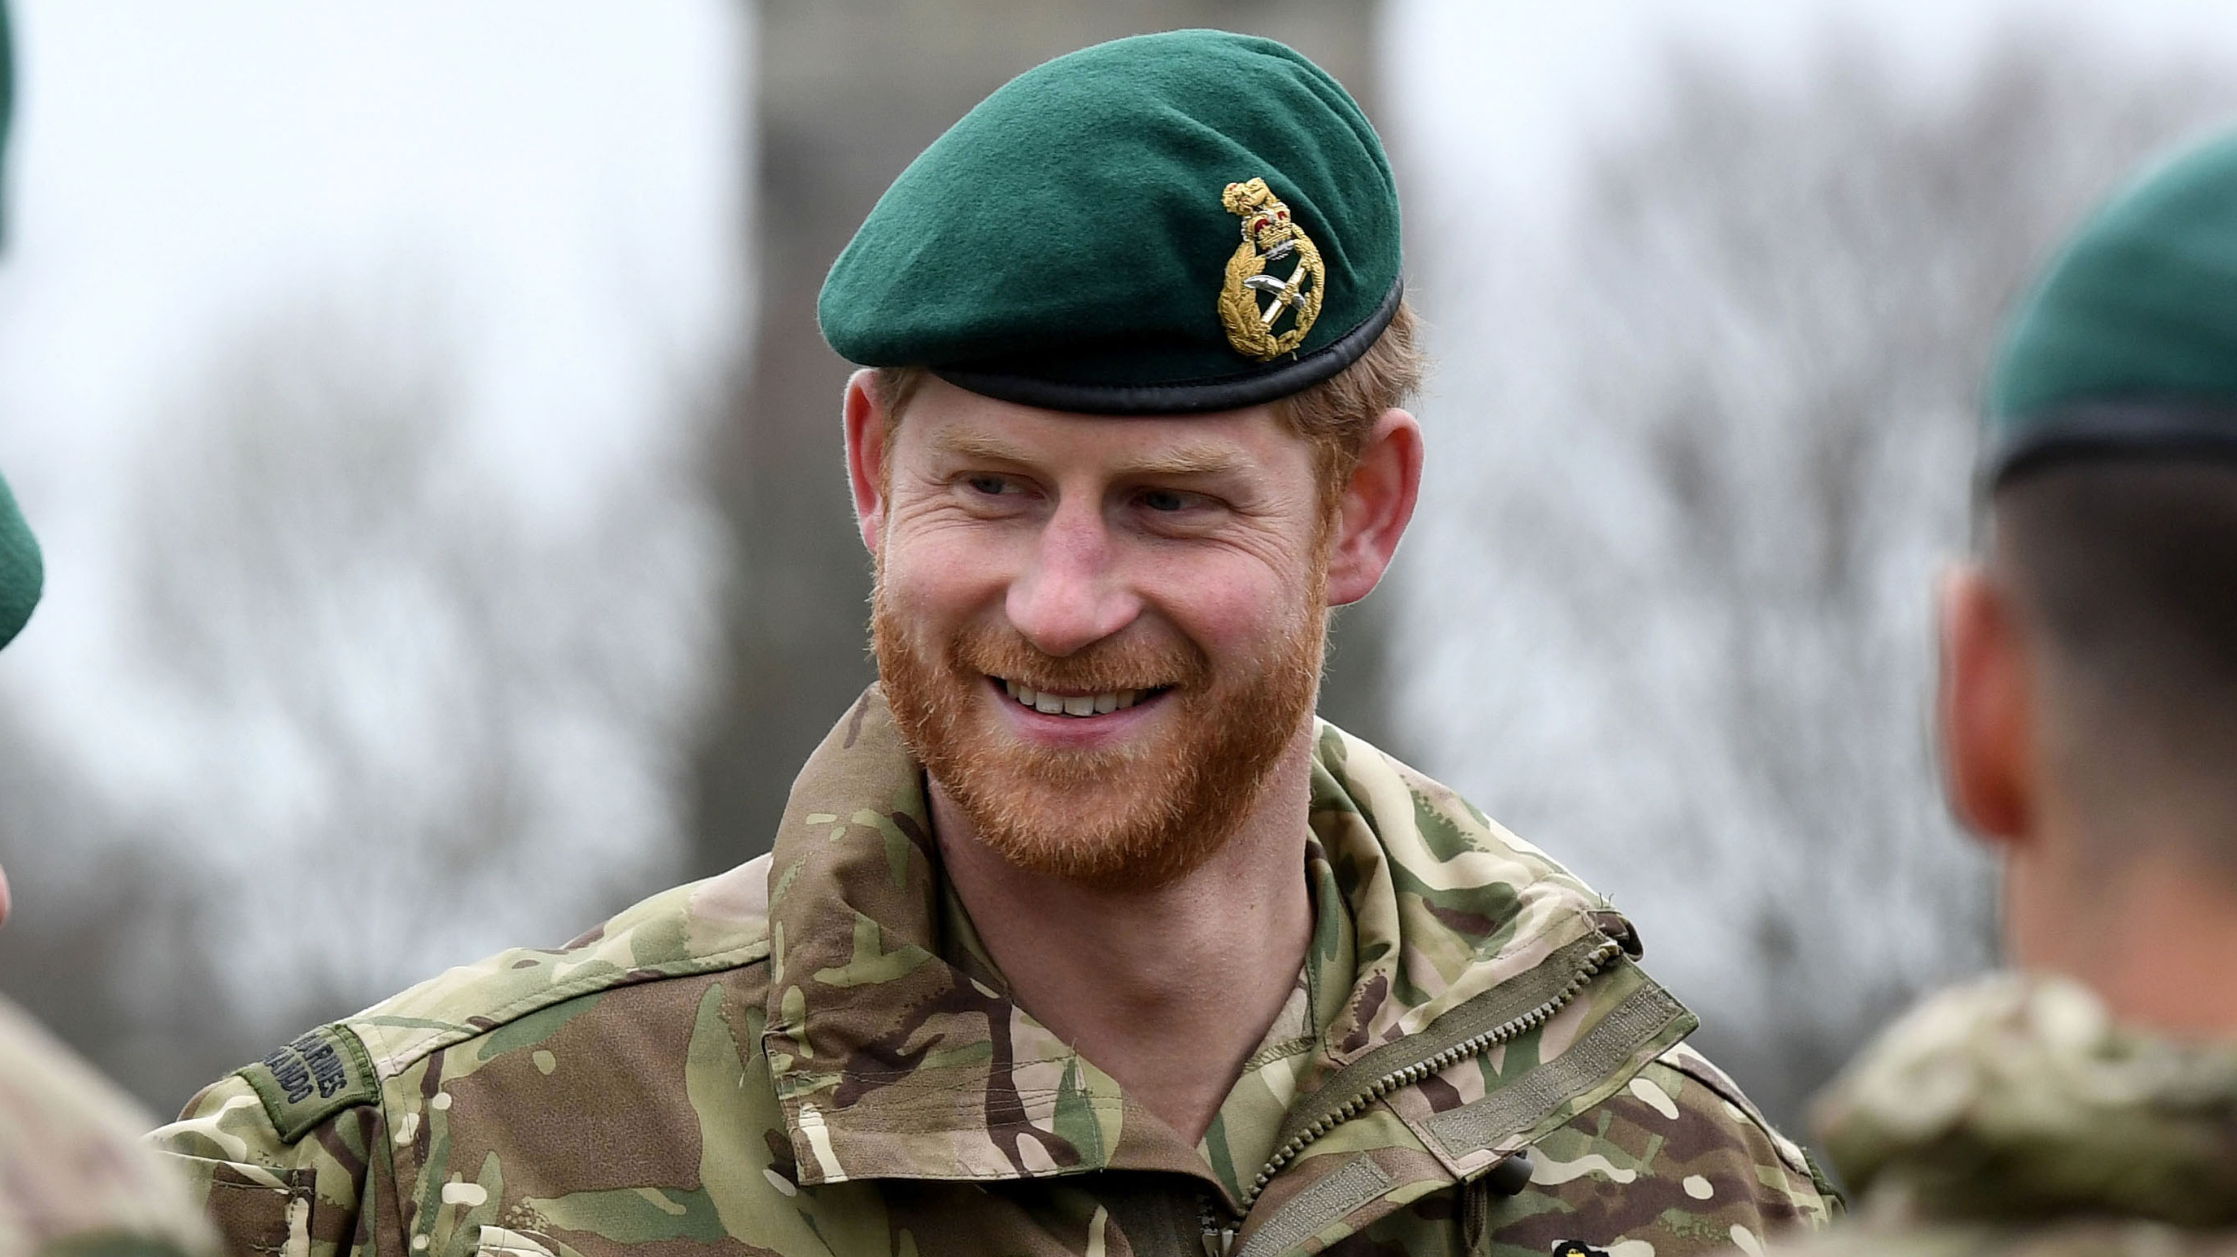 Prince Harry wearing a military uniform